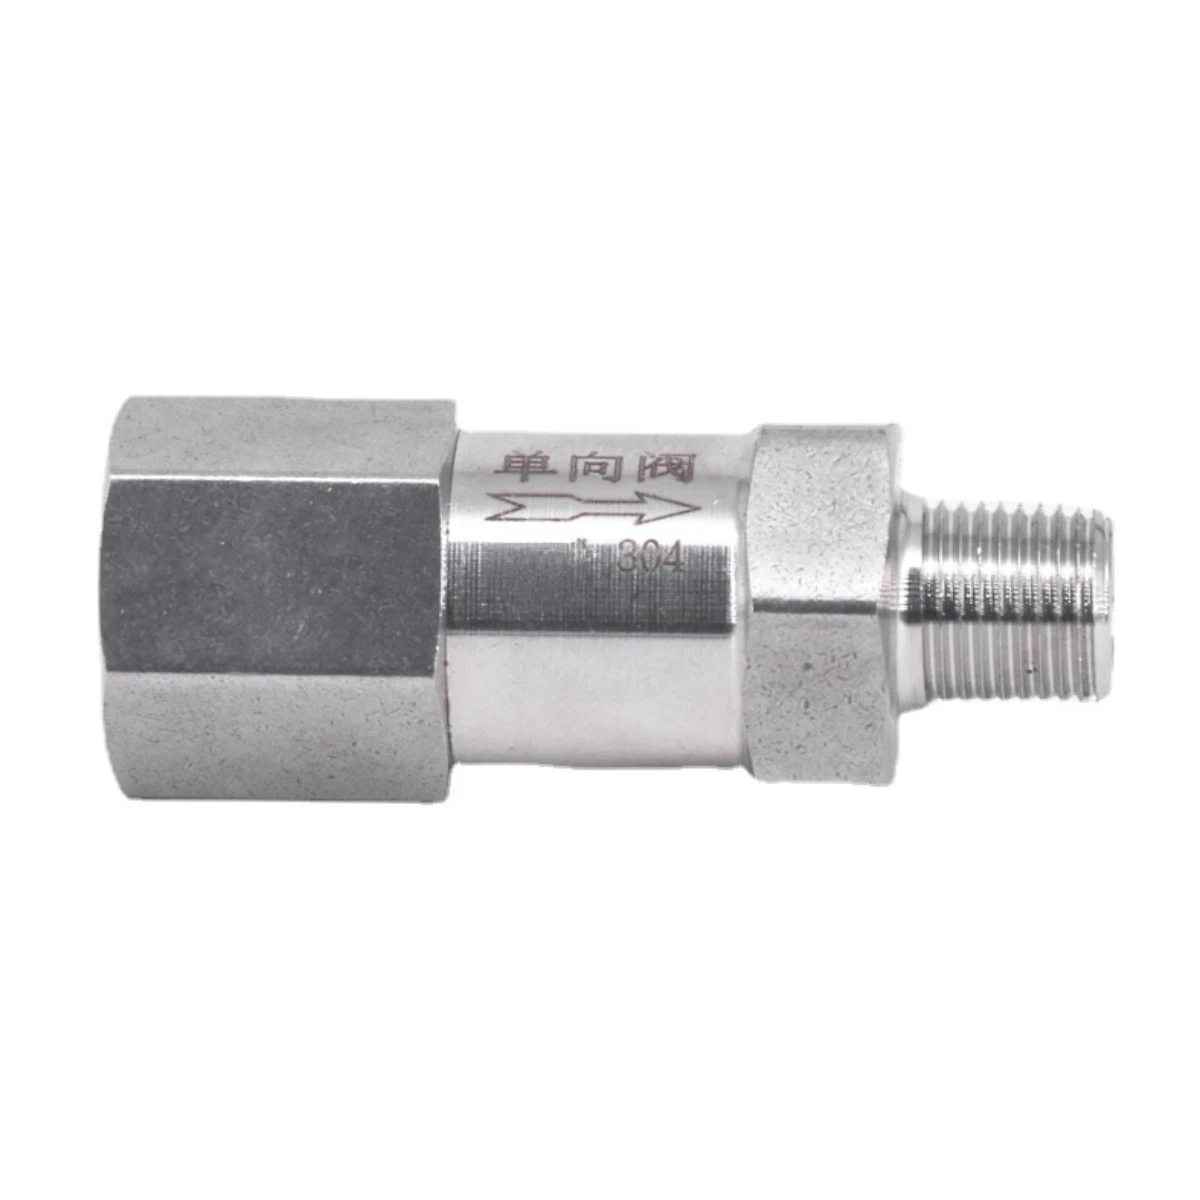 Check Valve Fitting M10X1 Female to 1/8" NPT Male 